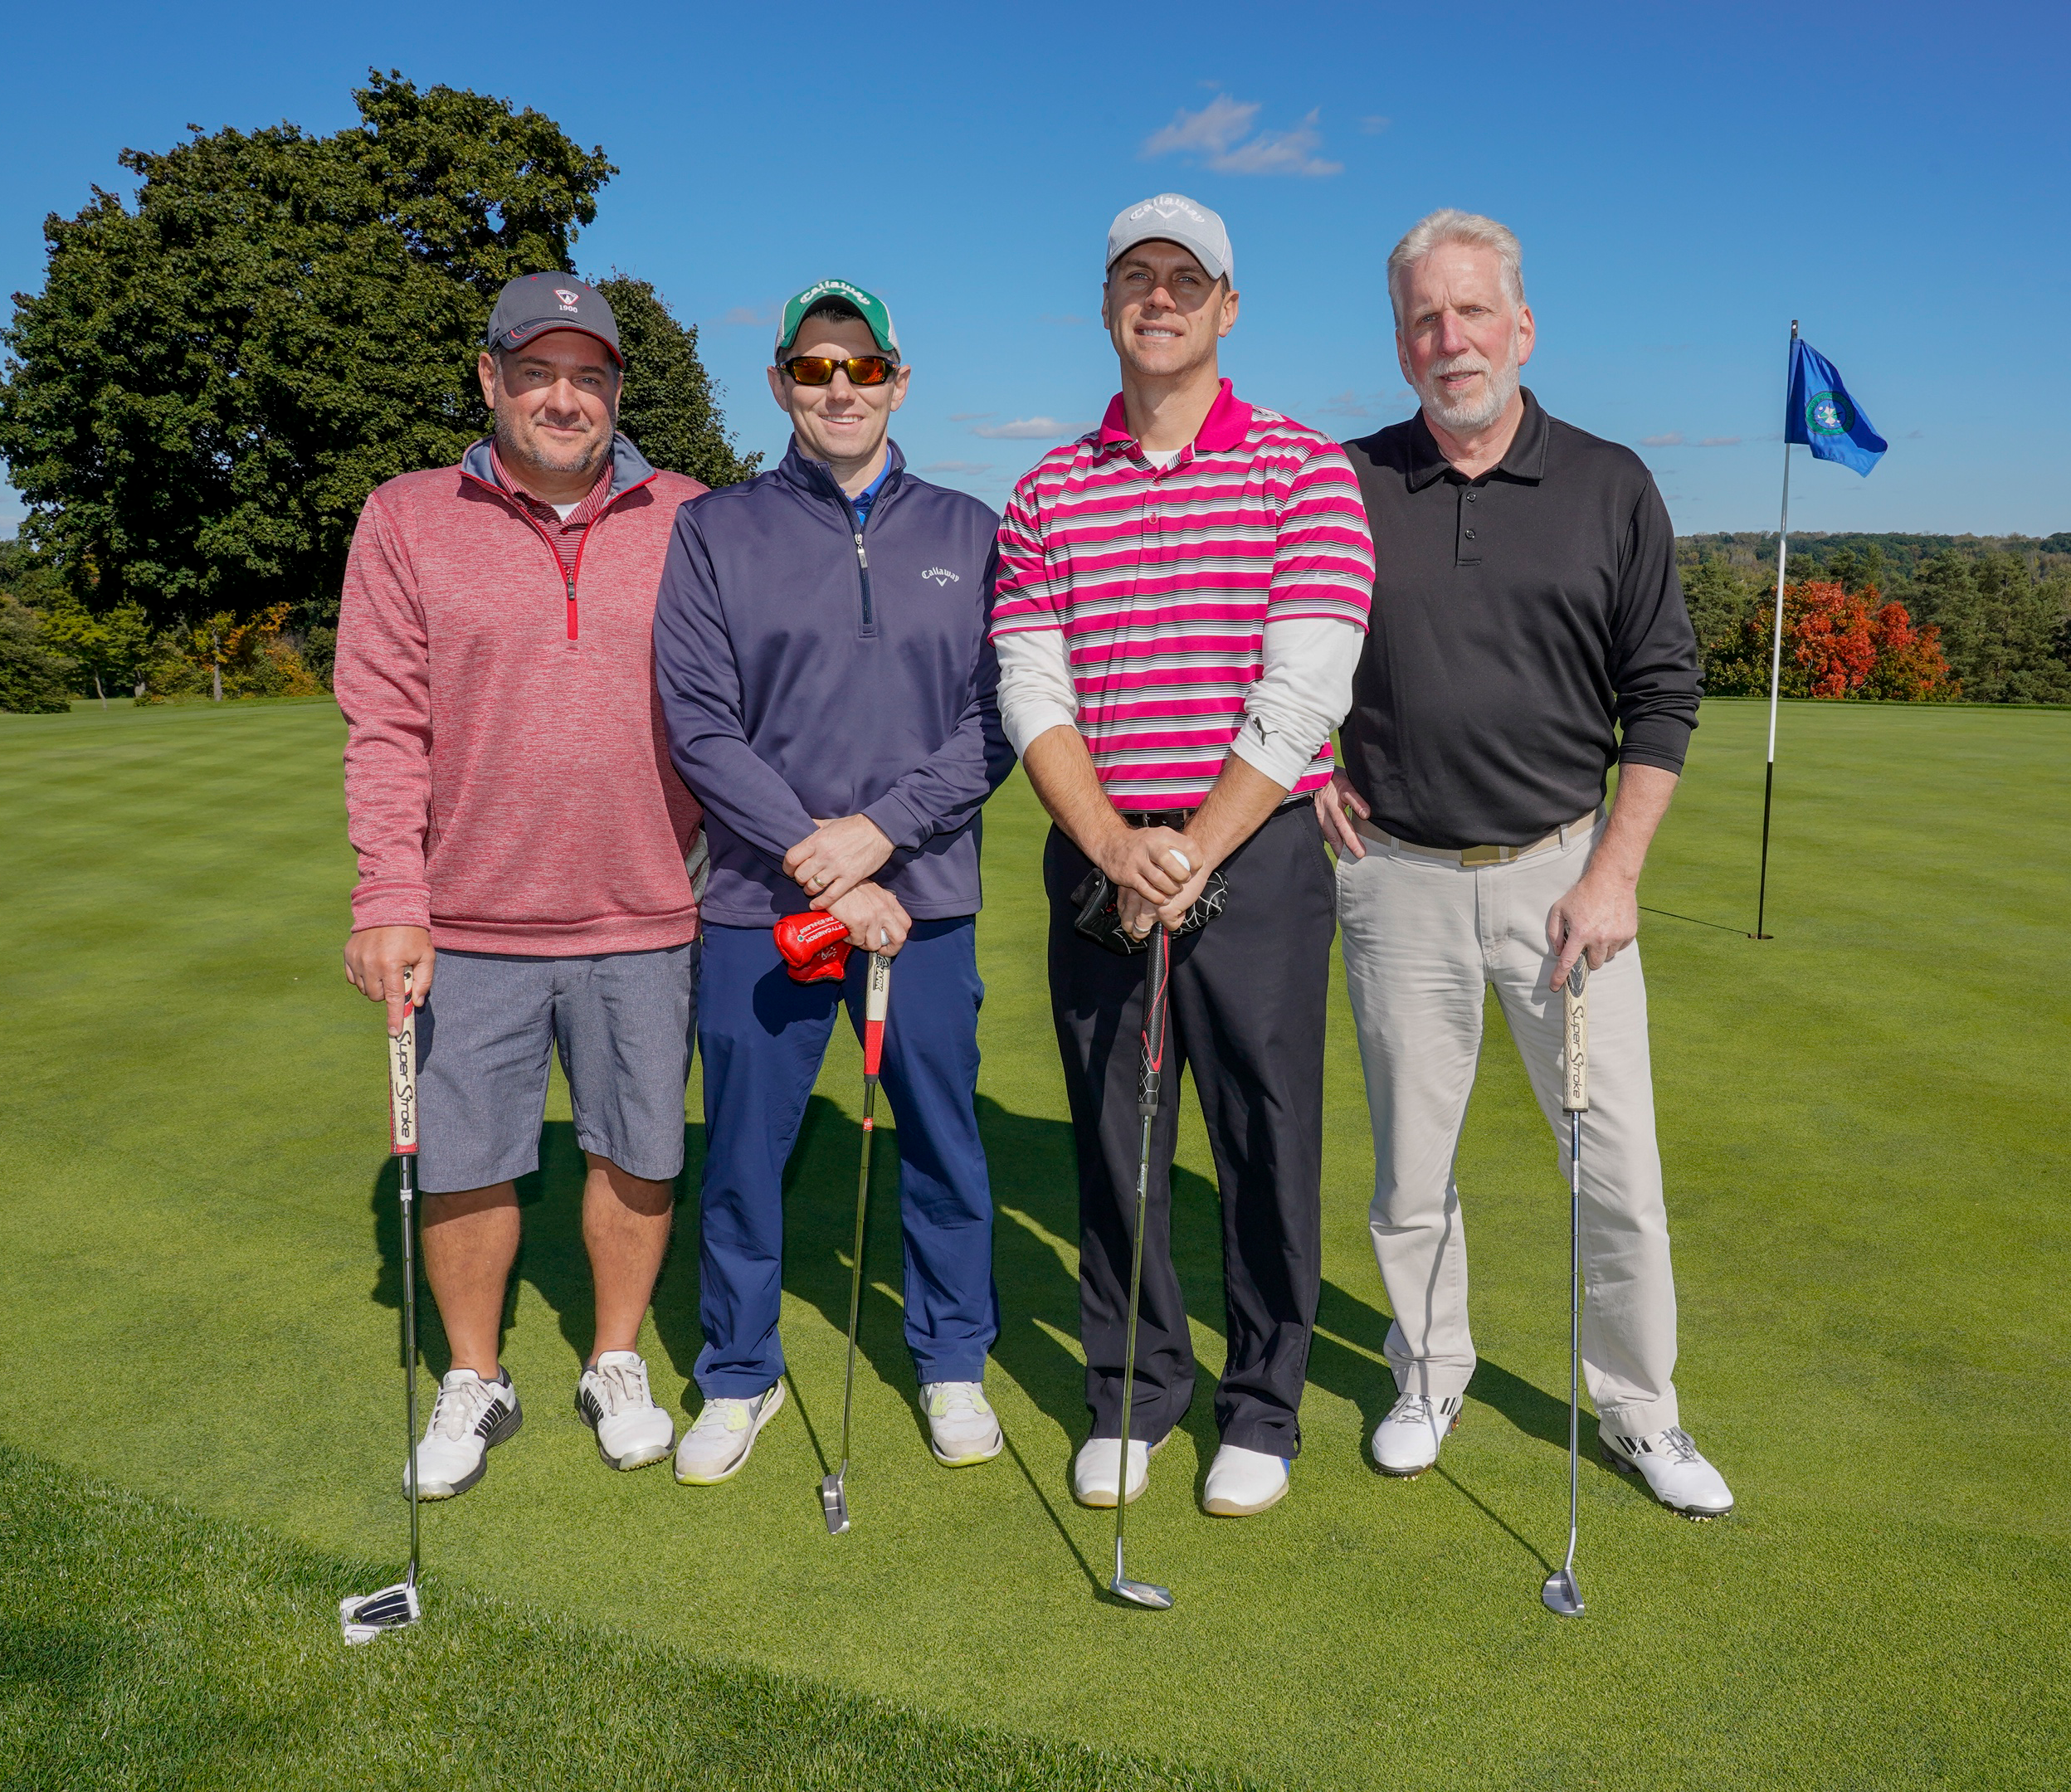 Four men wearing hats stand on a golf course. One holds a golf club.